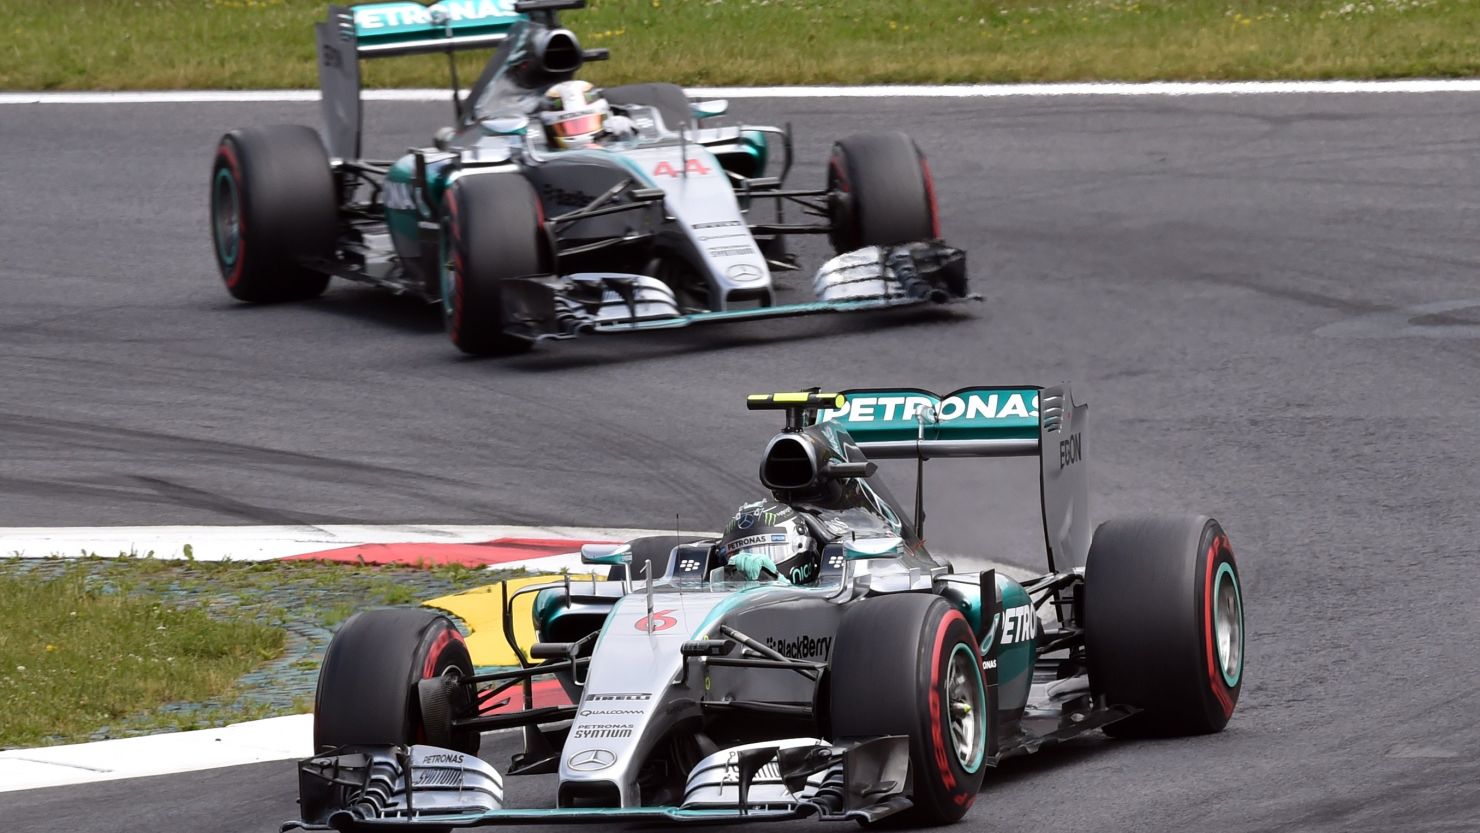 Nico Rosberg leads Mercedes teammate Lewis Hamilton on his way to victory at the Austrian Grand Prix.